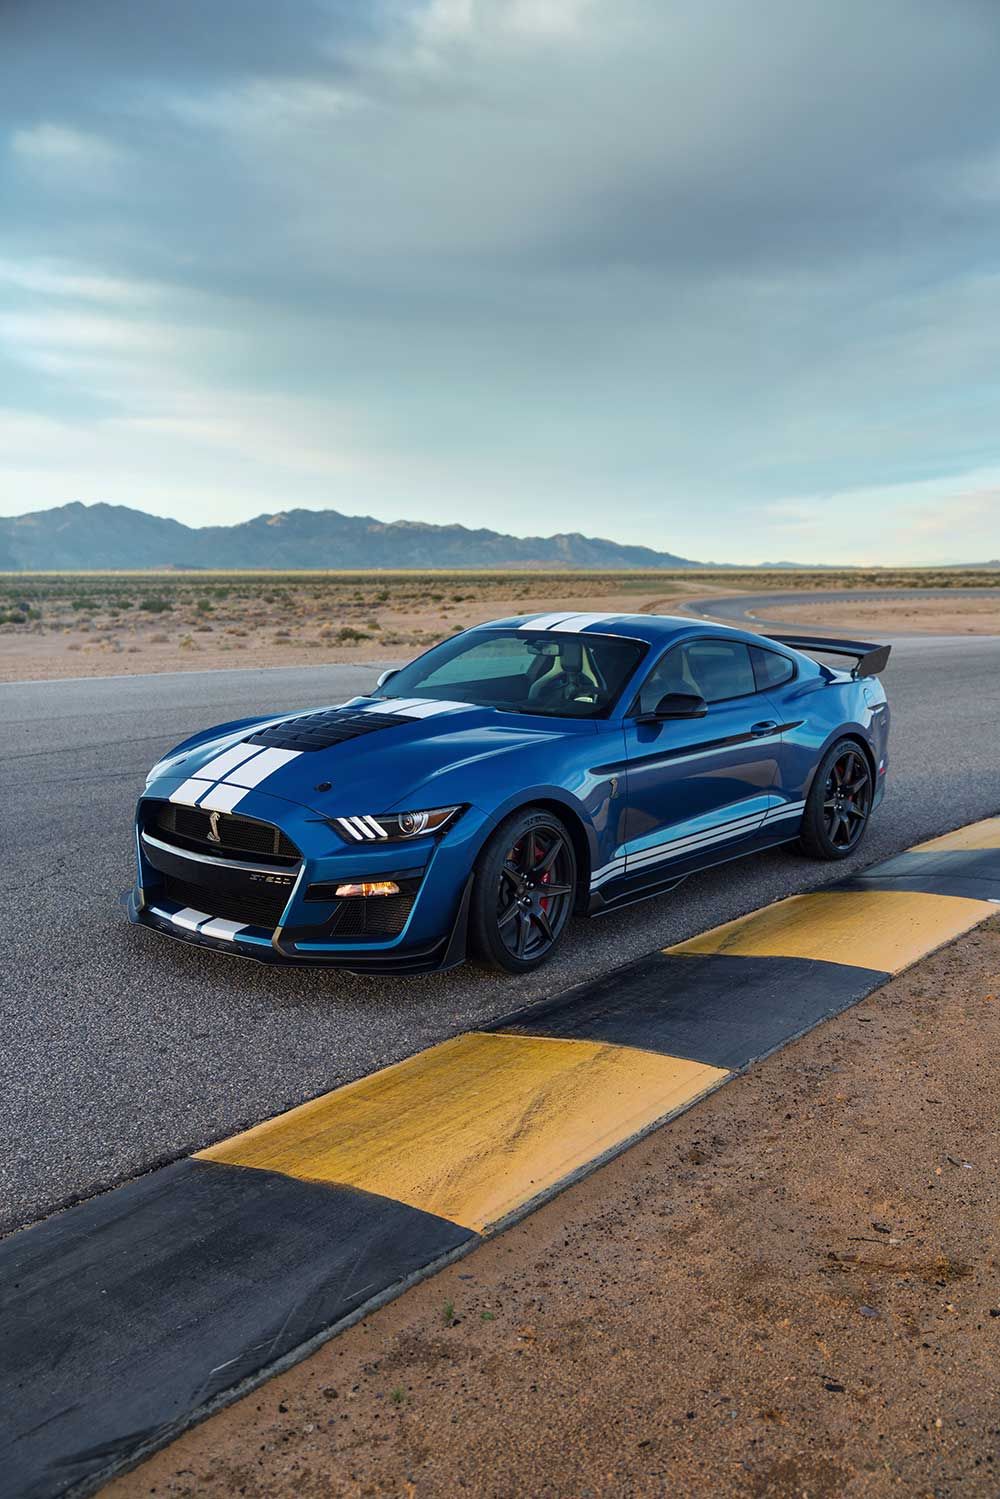 Free download Ford Mustang Shelby GT500 Picture Wallpaper Throttlebias [1000x1499] for your Desktop, Mobile & Tablet. Explore 2020 Ford Mustang Gt500 iPhone Wallpaper. Ford Mustang 2020 Wallpaper, Mustang Gt500 Wallpaper, 2013 Mustang GT500